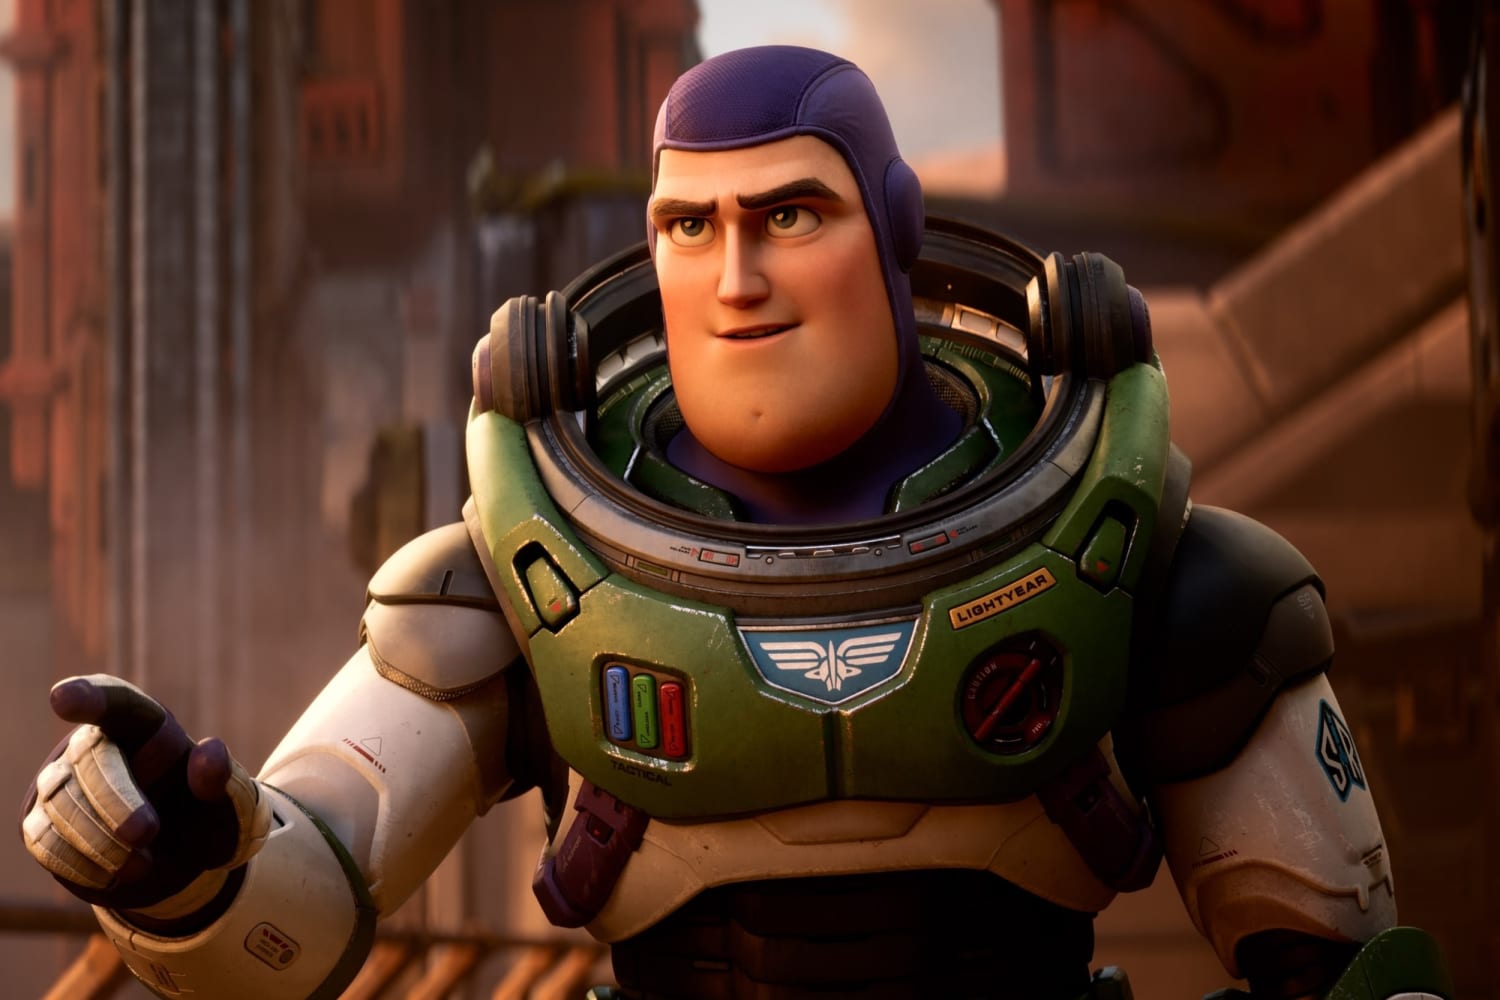 Buzz Lightyear's 'Toy Story' spinoff deserves — but Pixar chickens out